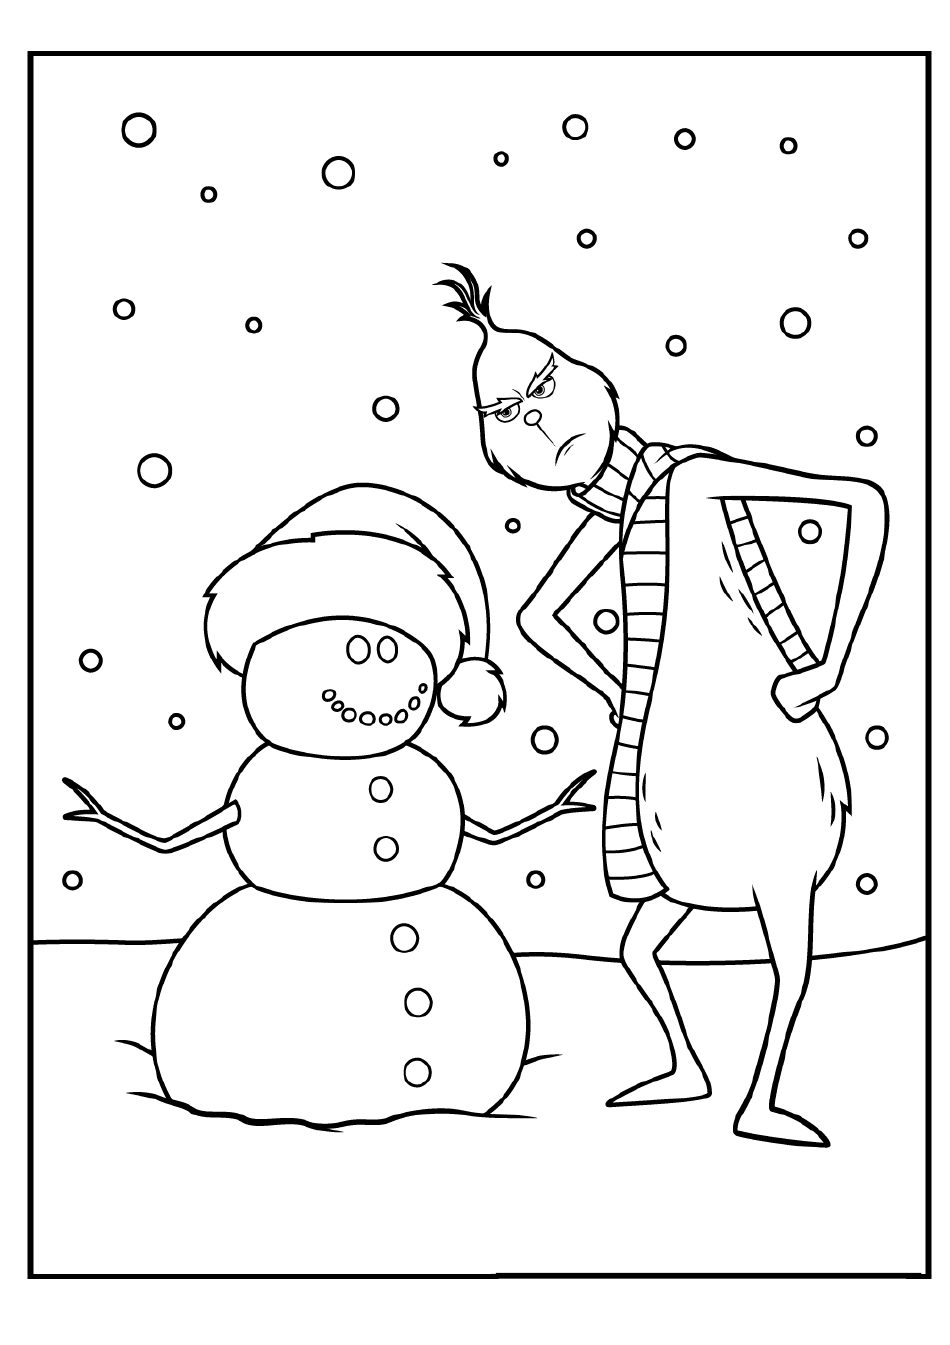 Grinch Breathtaking Coloring Page - Snowman and Grinch Standing Together